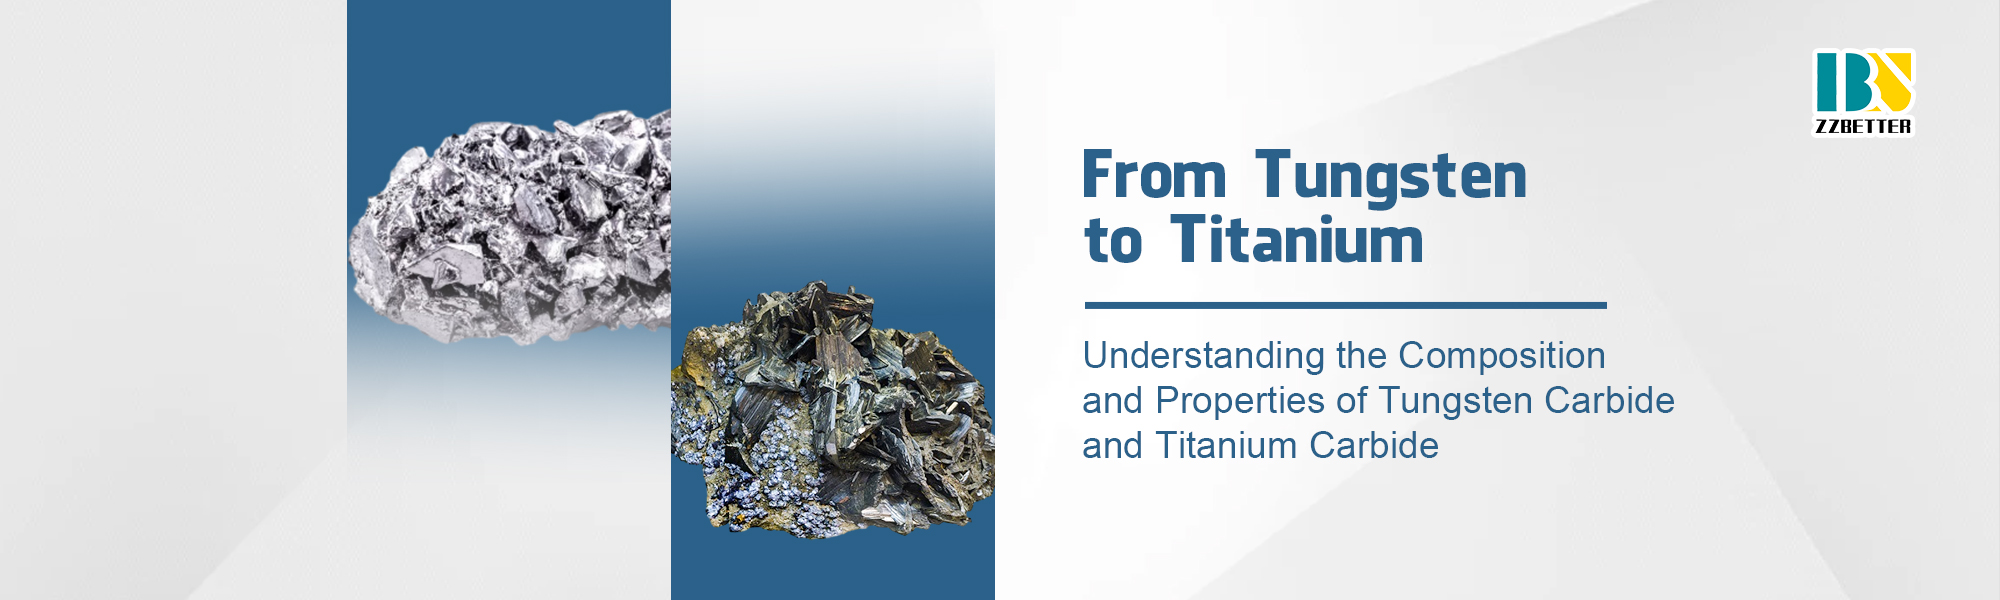 Understanding the Composition and Properties of Tungsten Carbide and Titanium Carbide